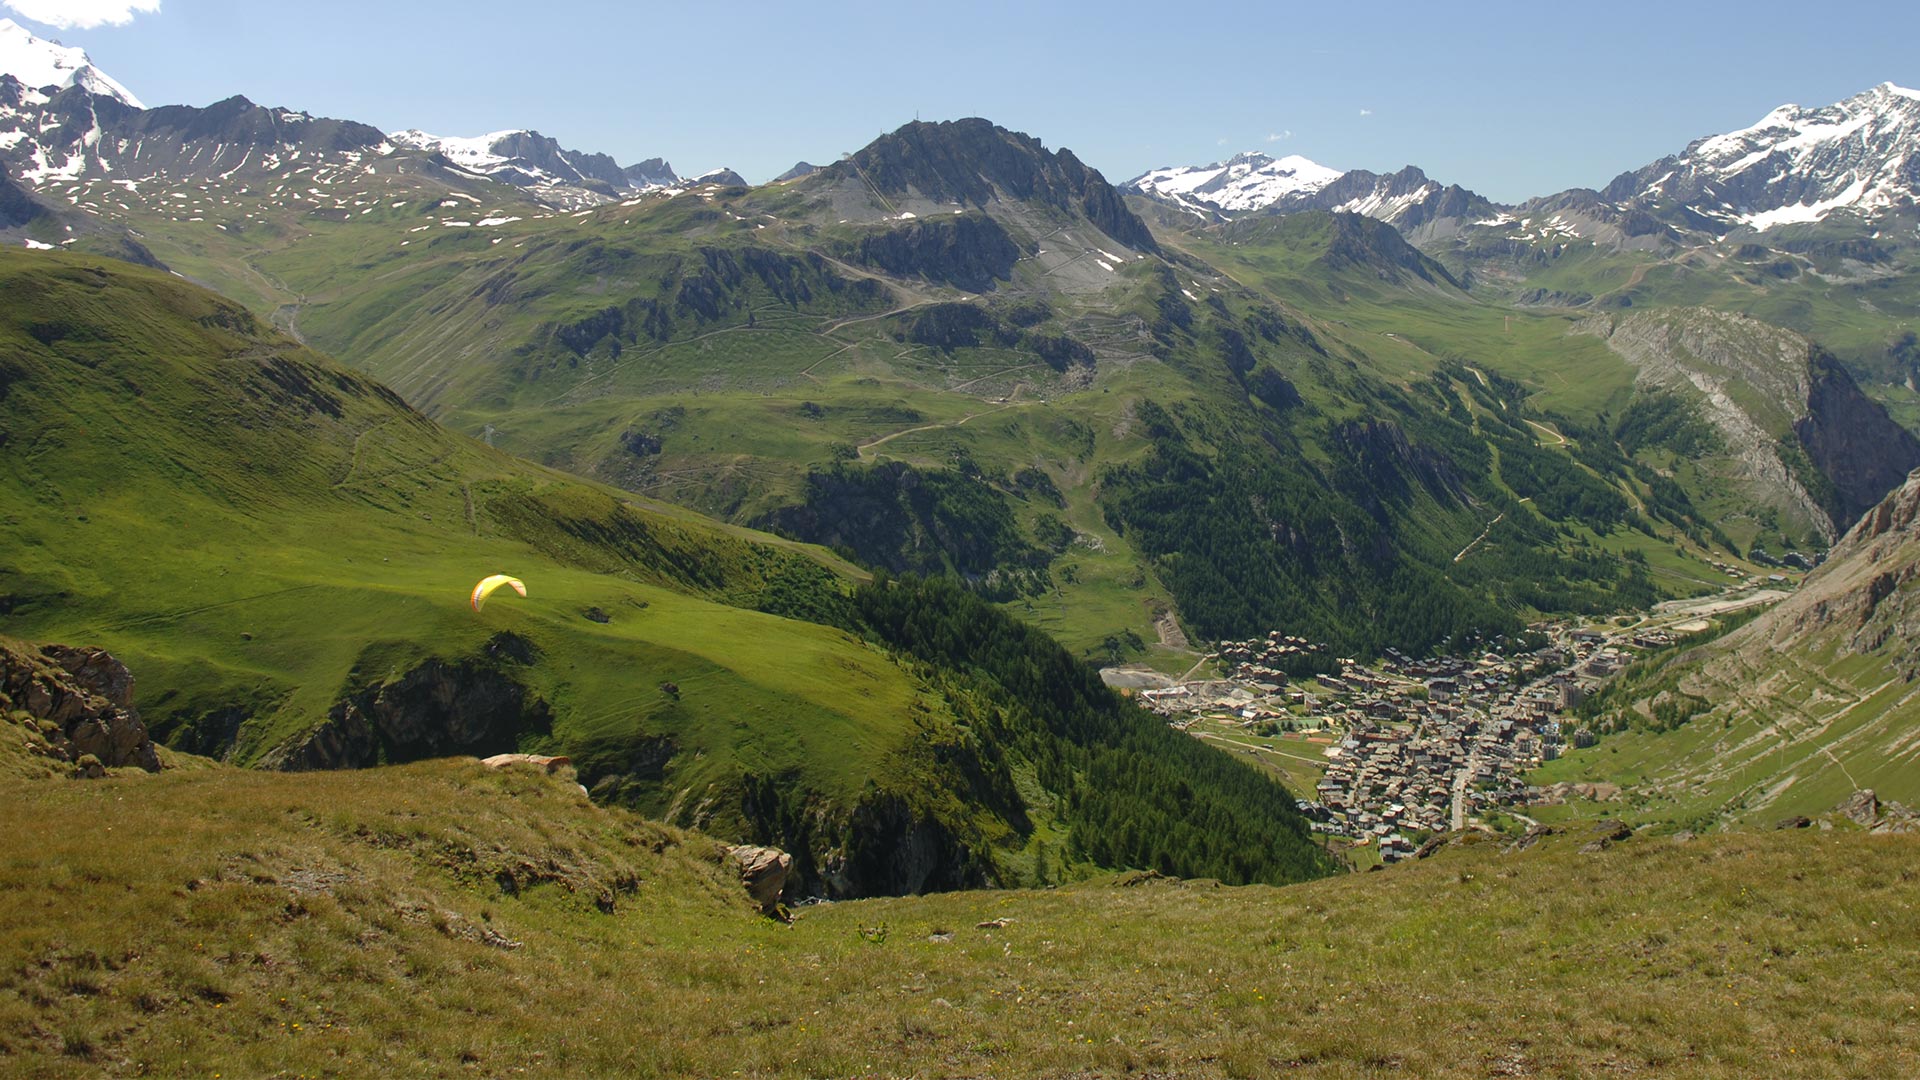 Val d'Isere nestles in an amazing valley